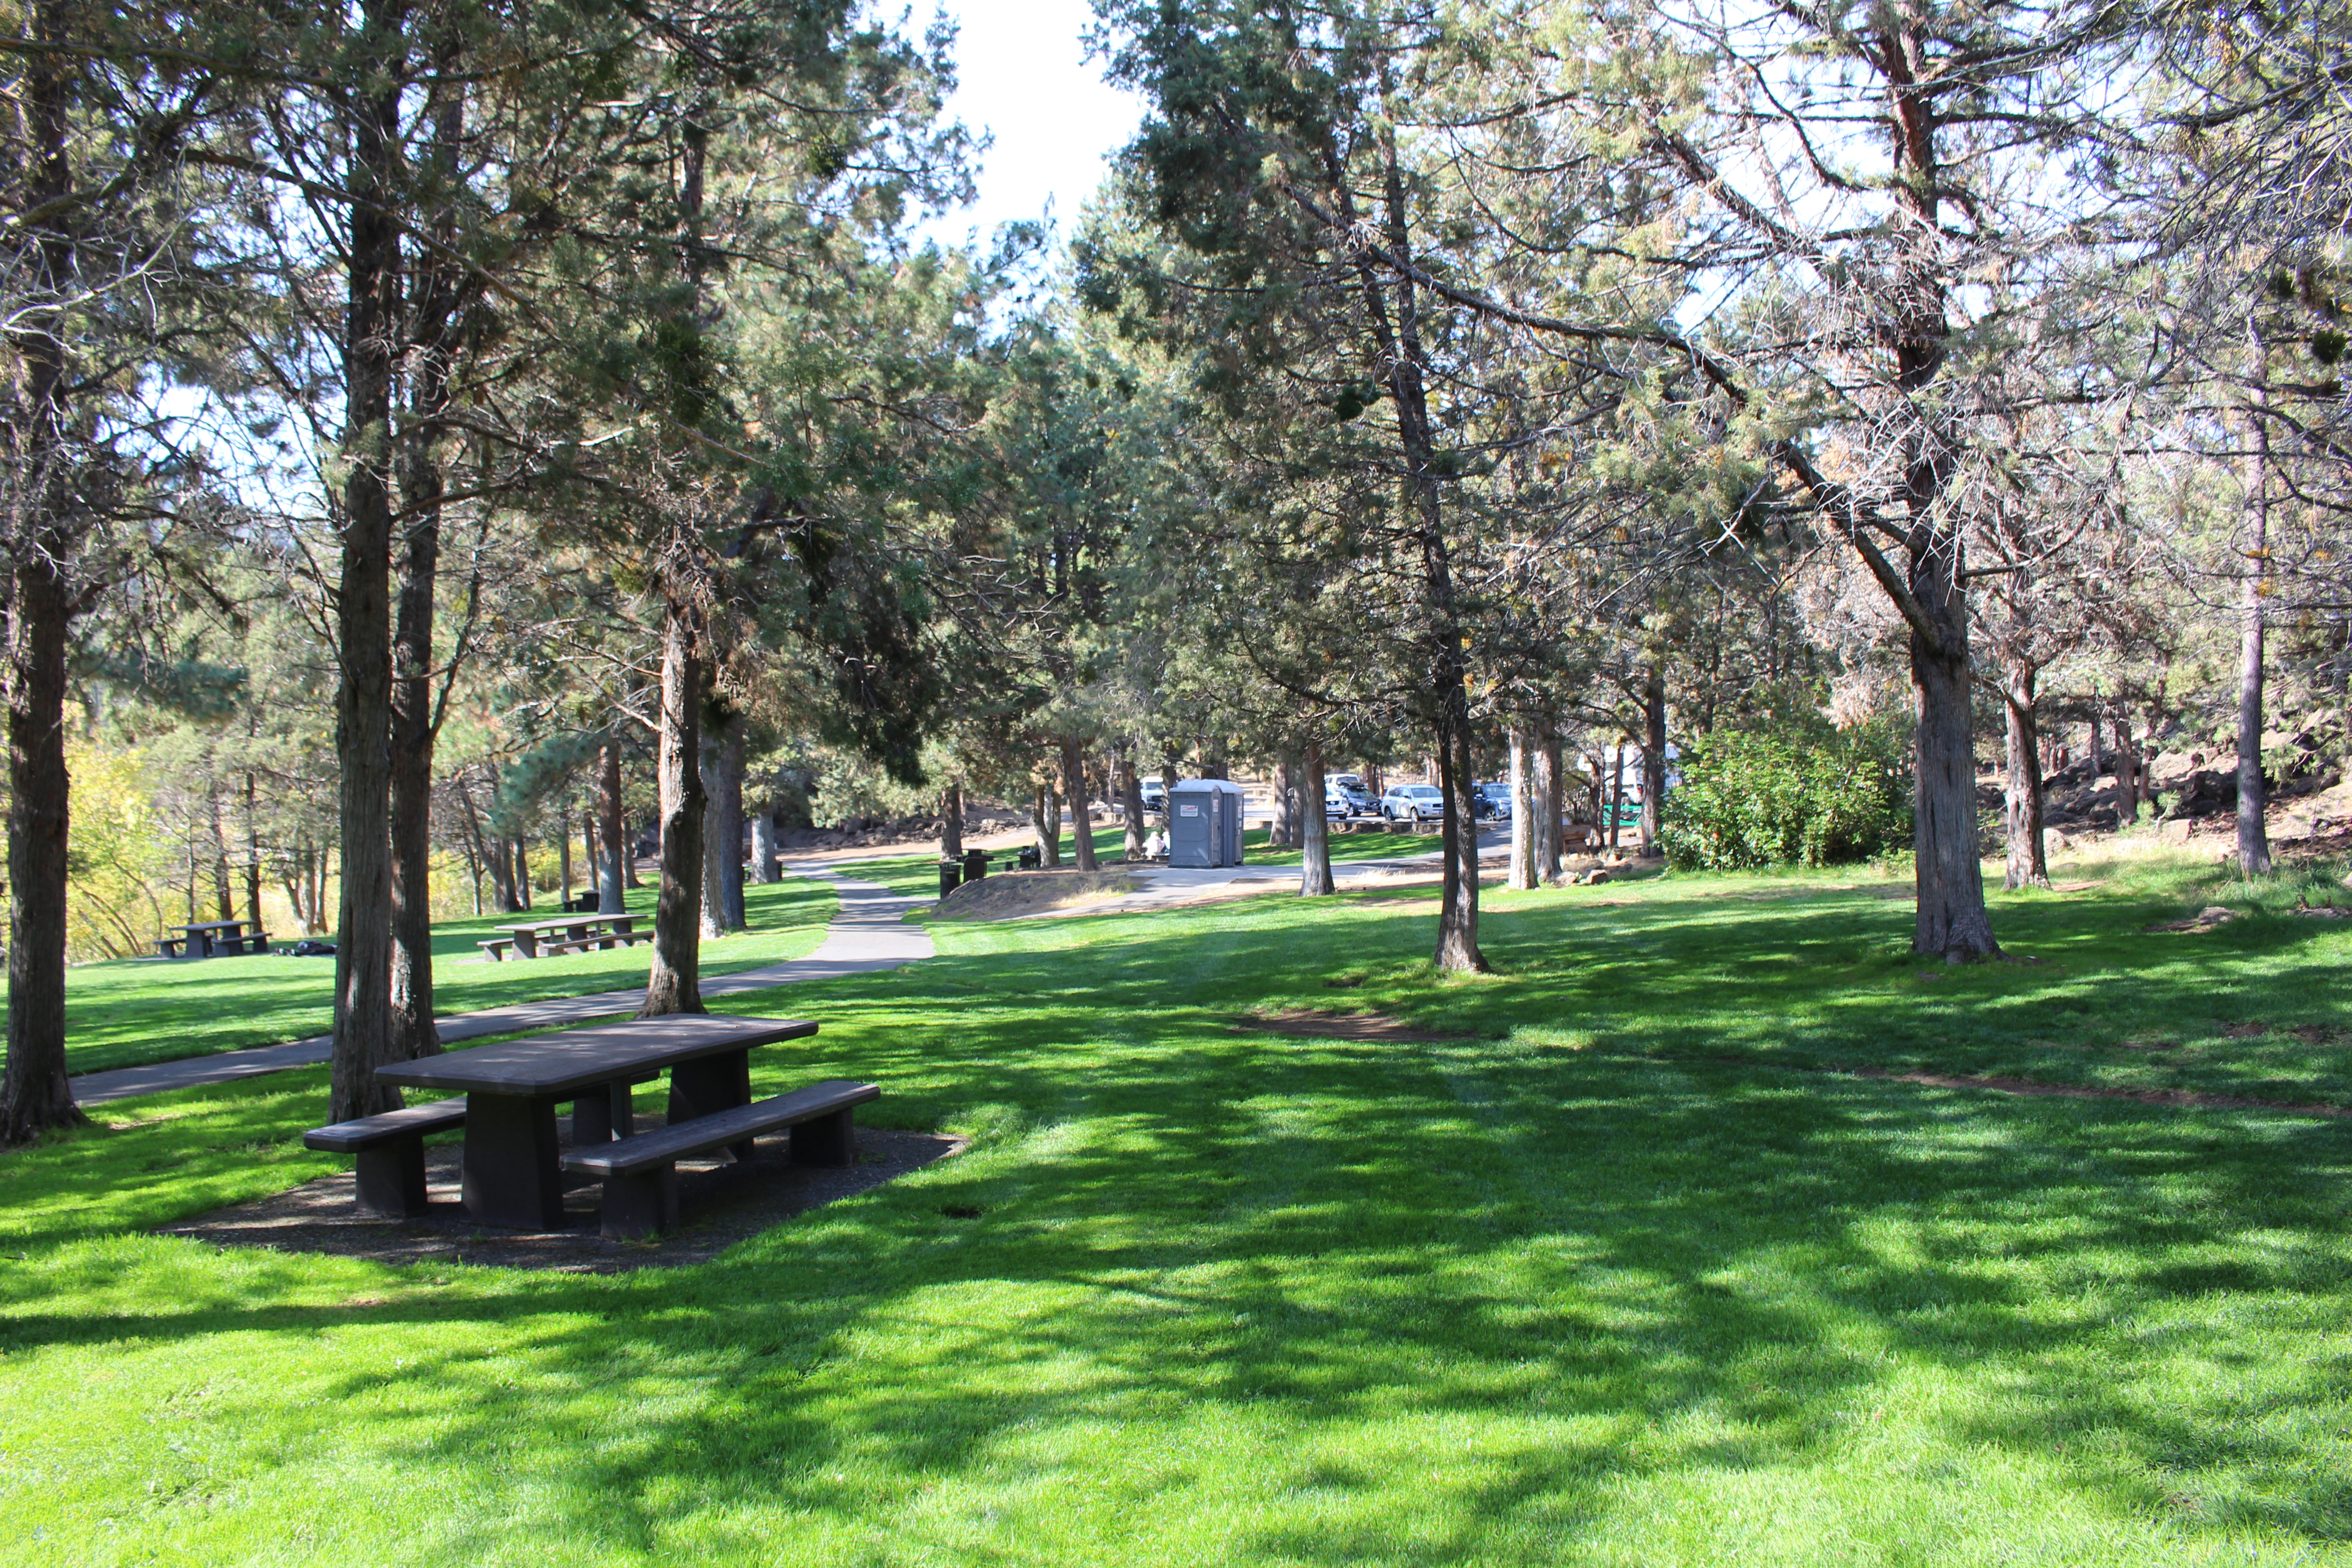 Sawyer Park Picnic Area and pathway